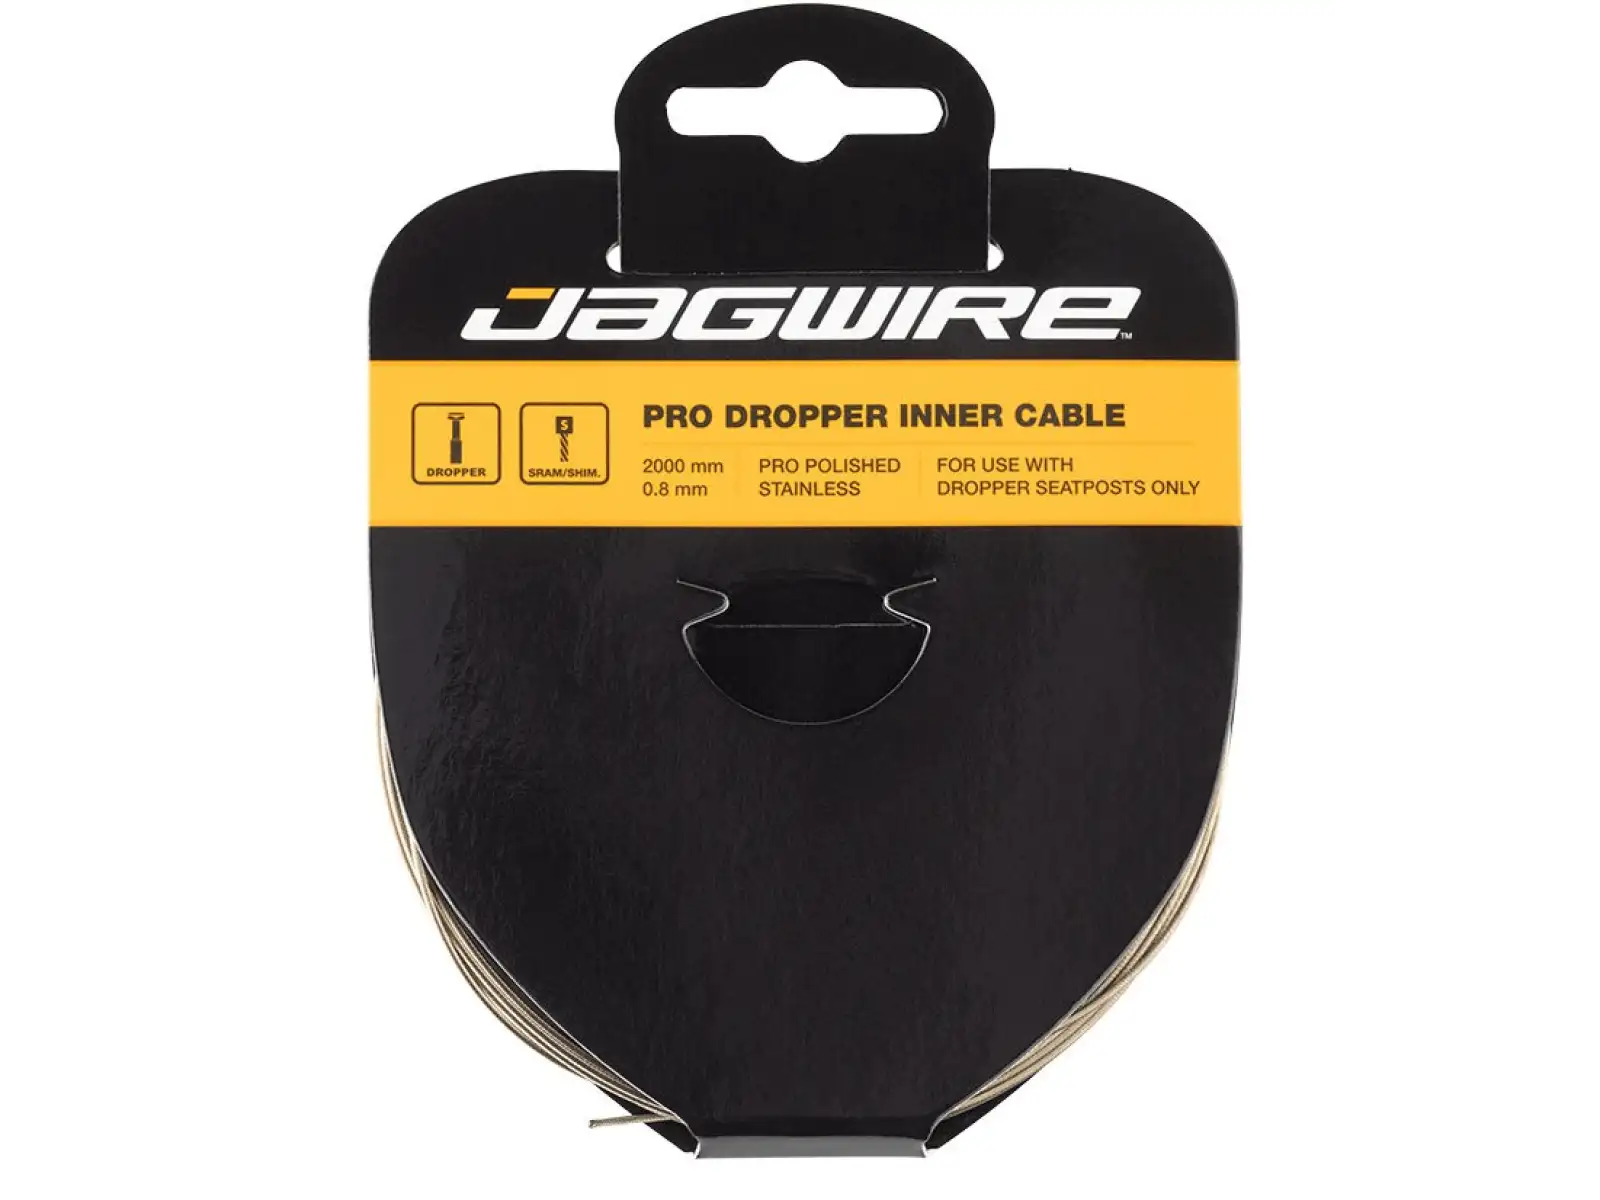 Jagwire Dropper Inner Cable Pro Polished Stainless lanko teleskopické sedlovky 0.8x2000mm